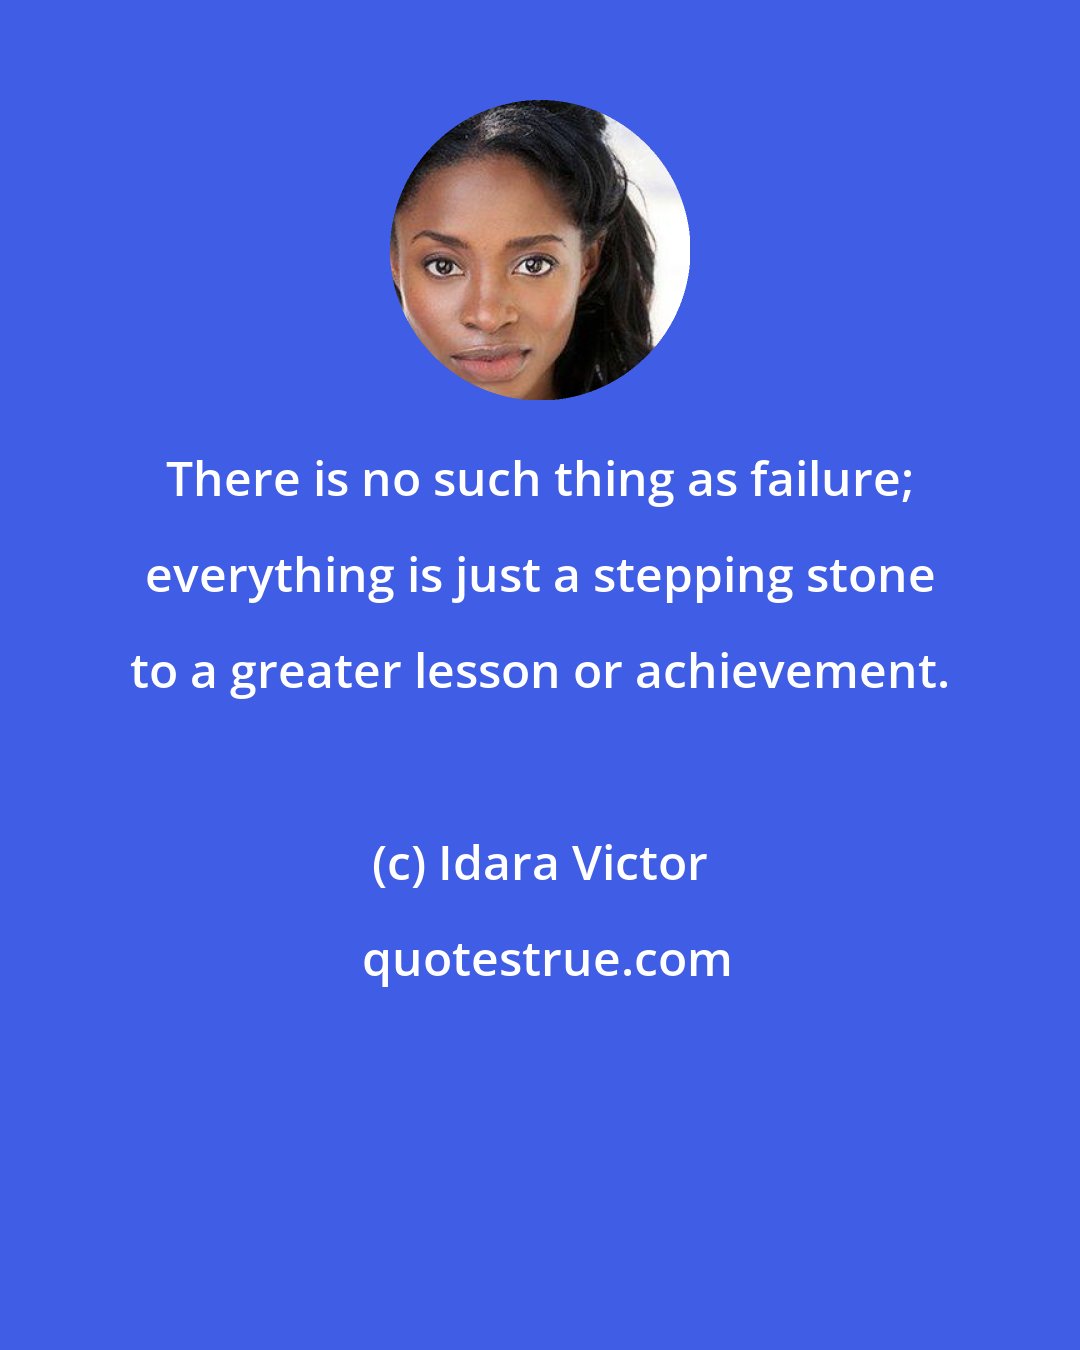 Idara Victor: There is no such thing as failure; everything is just a stepping stone to a greater lesson or achievement.